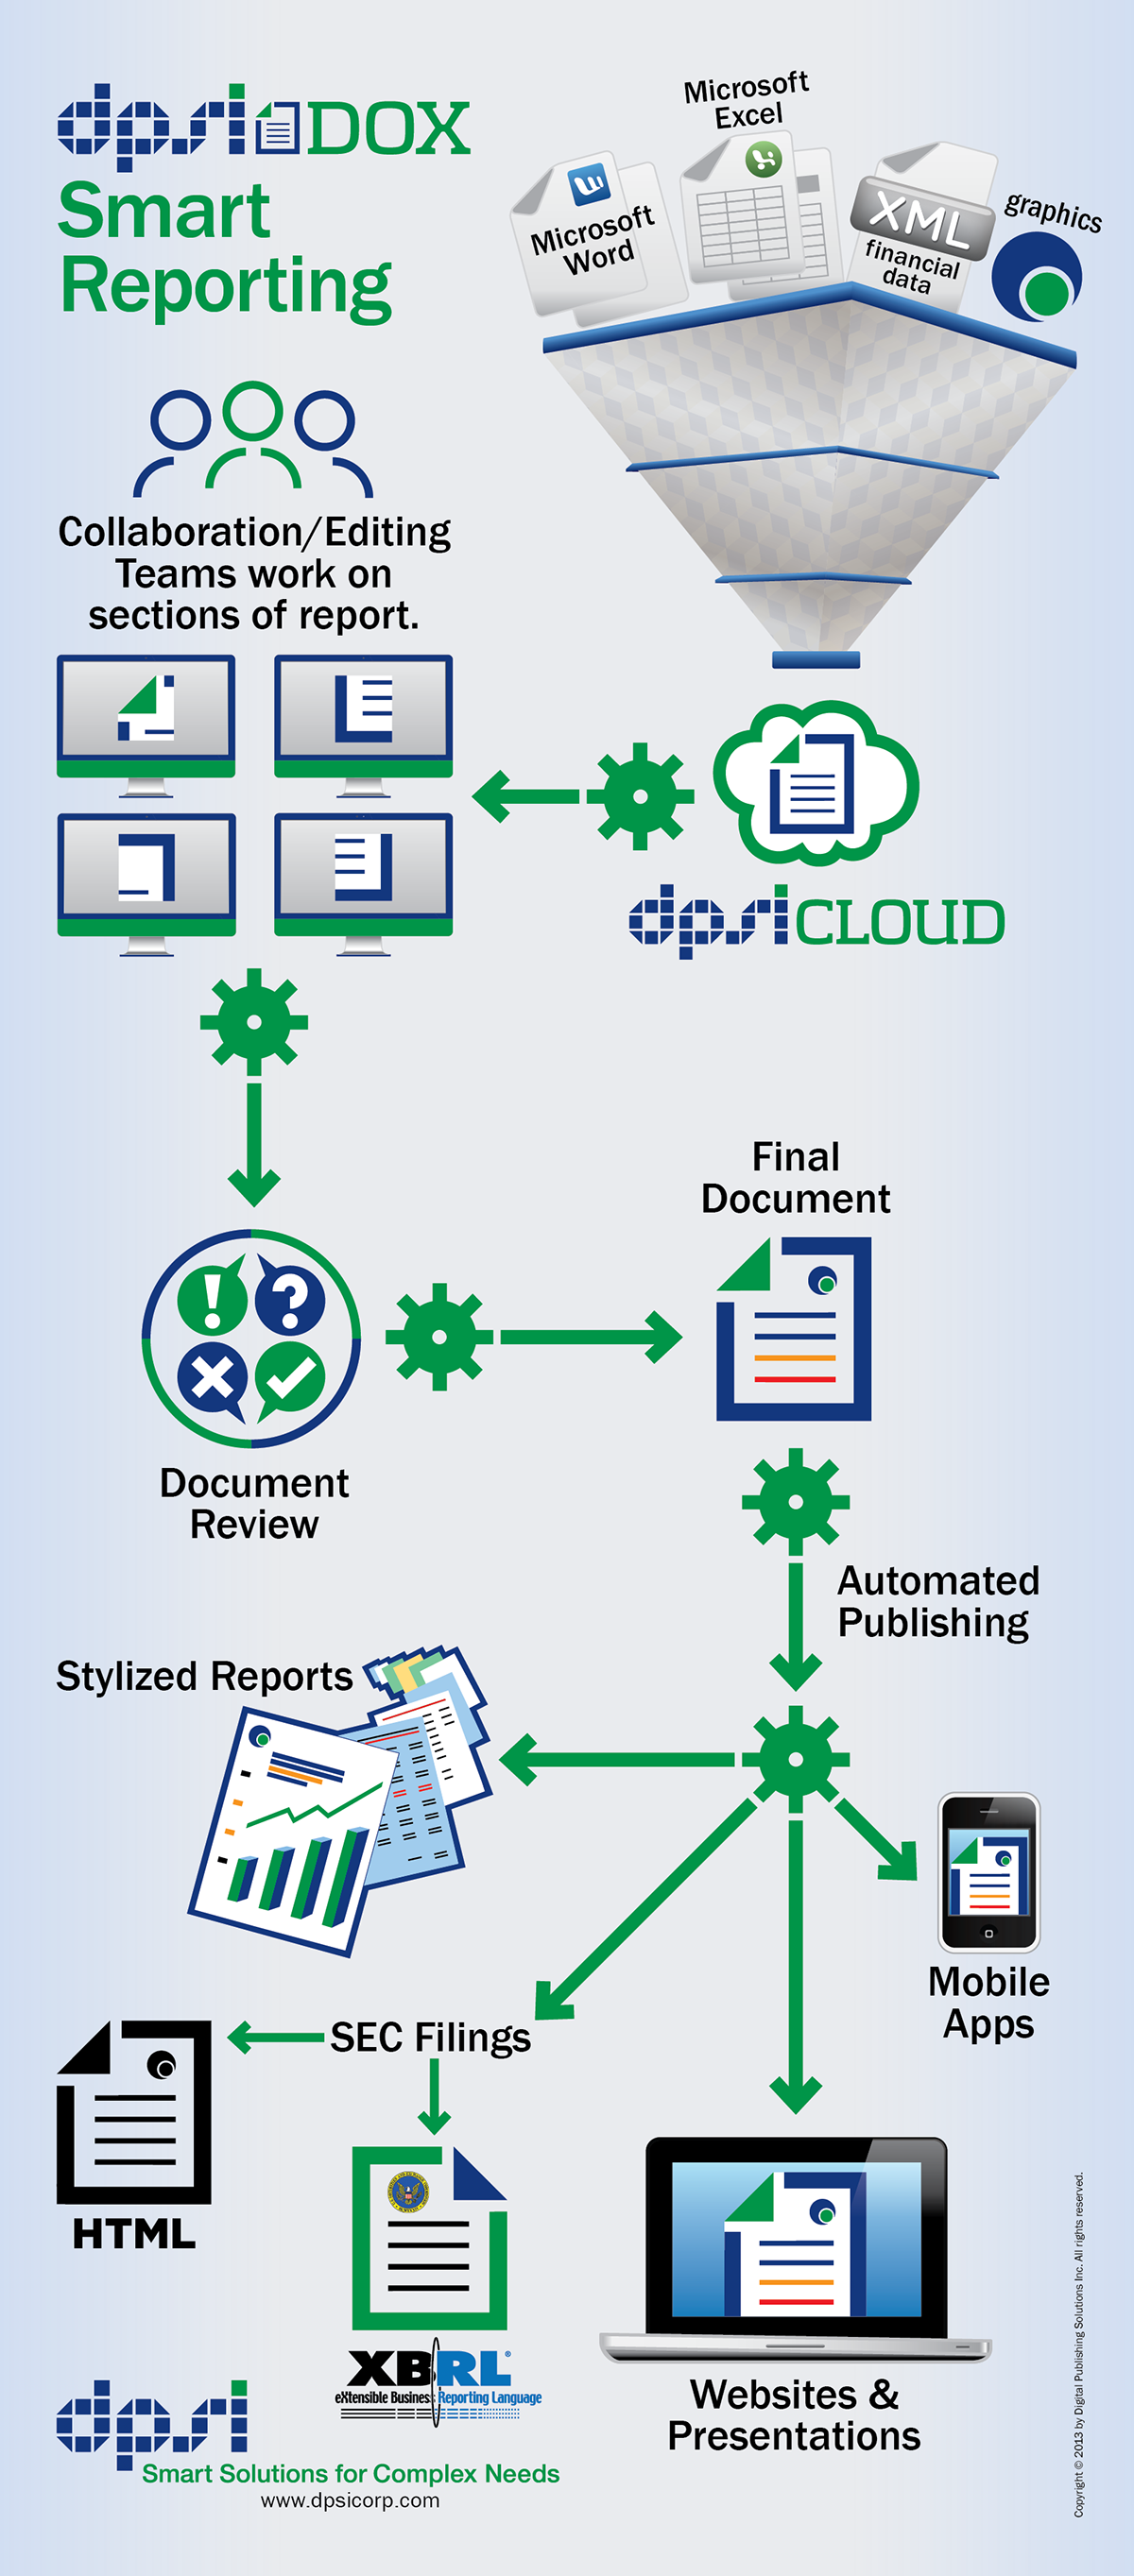 digital publishing workflow annual report sec filings xml cloud collaboration dpsiCLOUD icons automated publishing